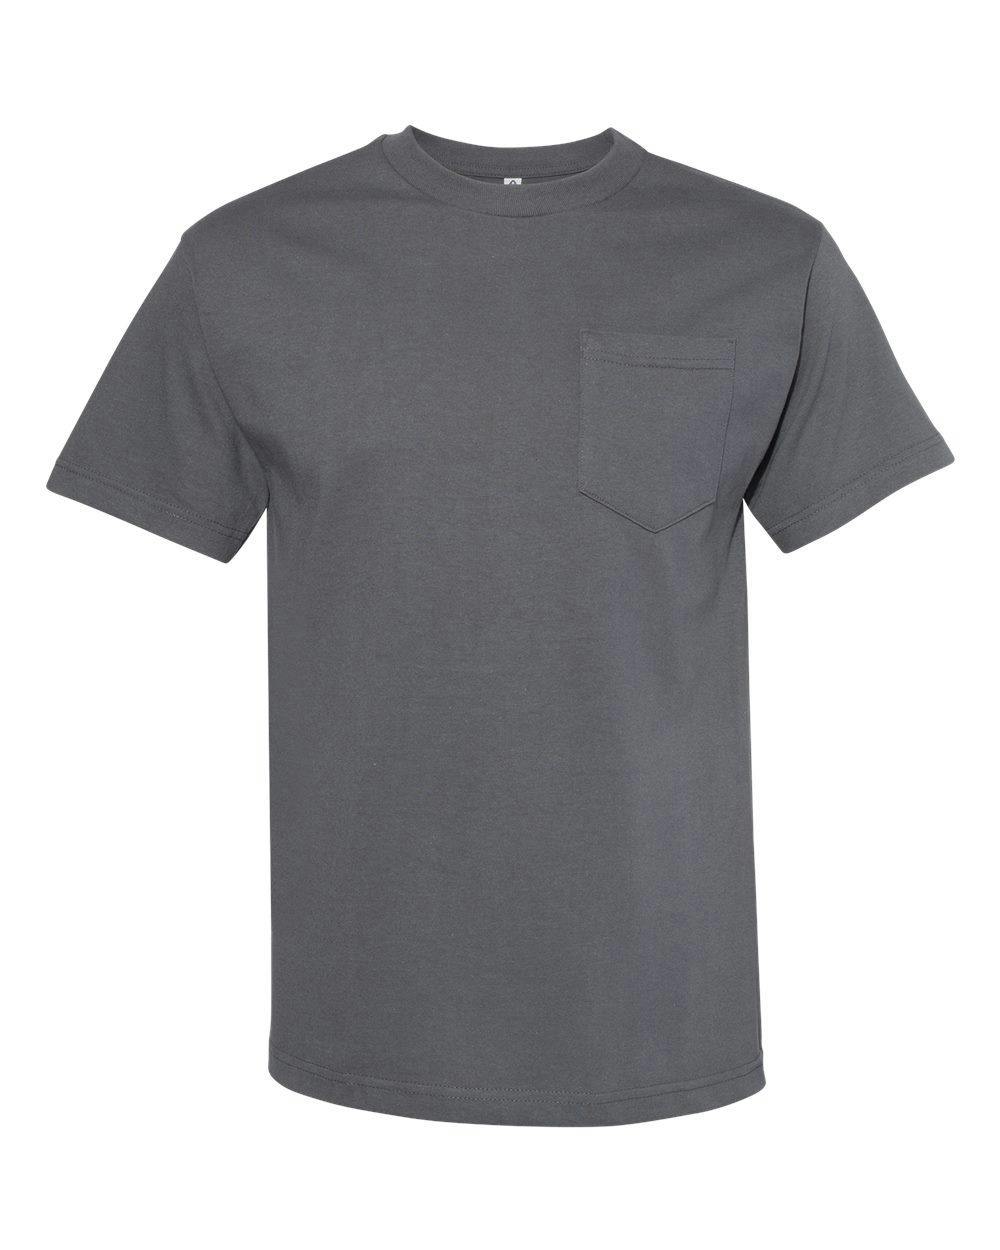 Image for Classic Pocket T-Shirt - 1305